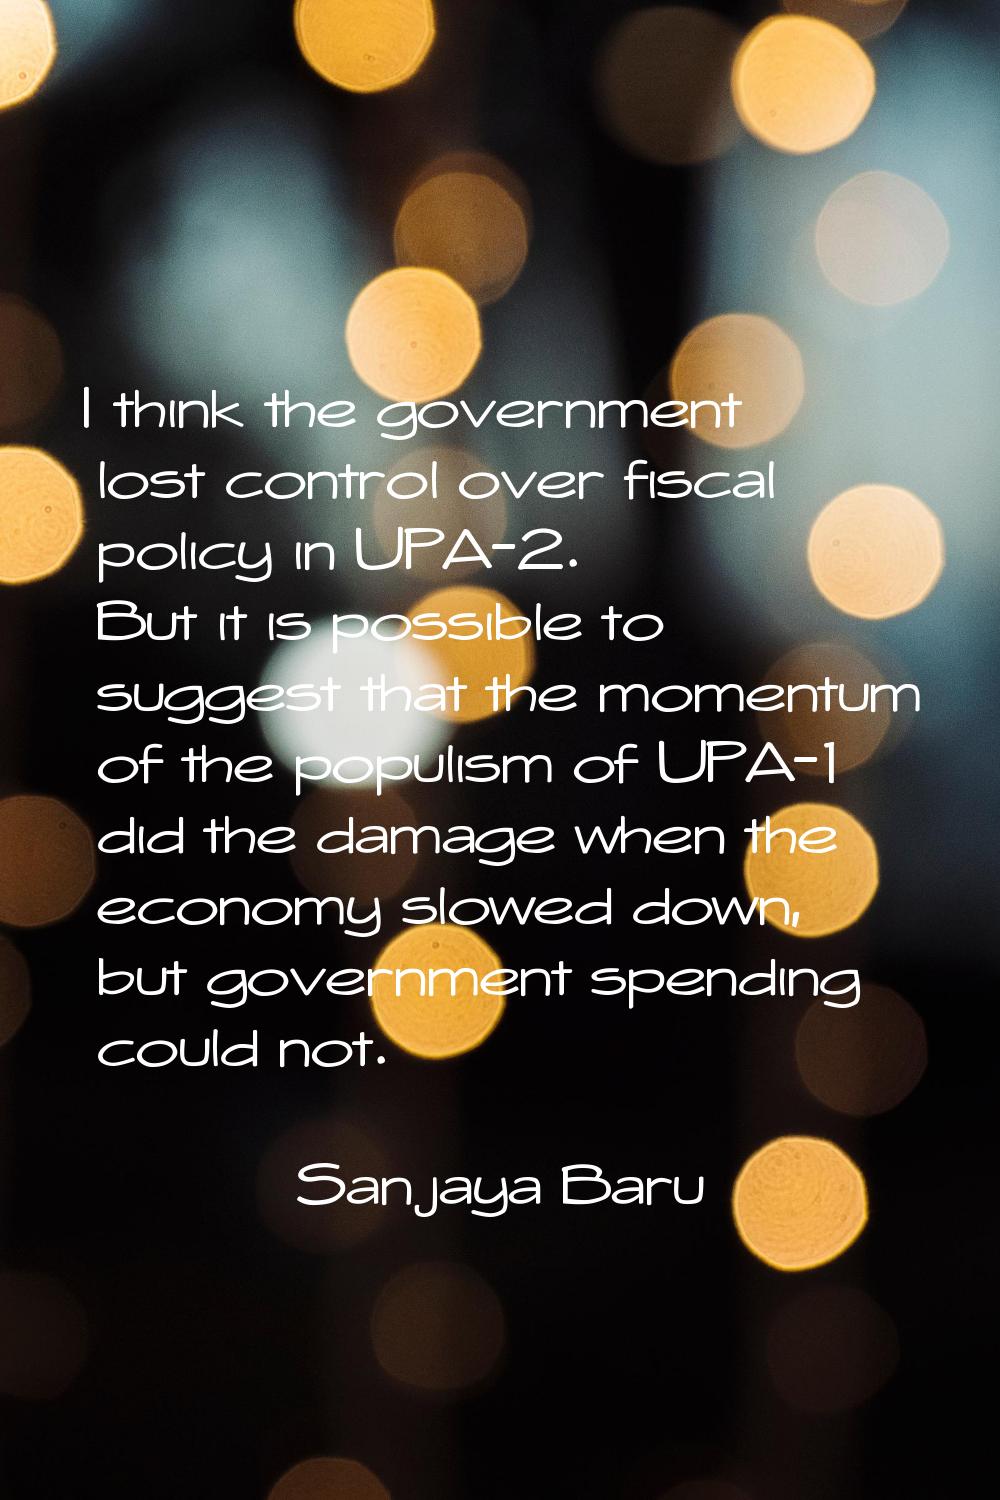 I think the government lost control over fiscal policy in UPA-2. But it is possible to suggest that